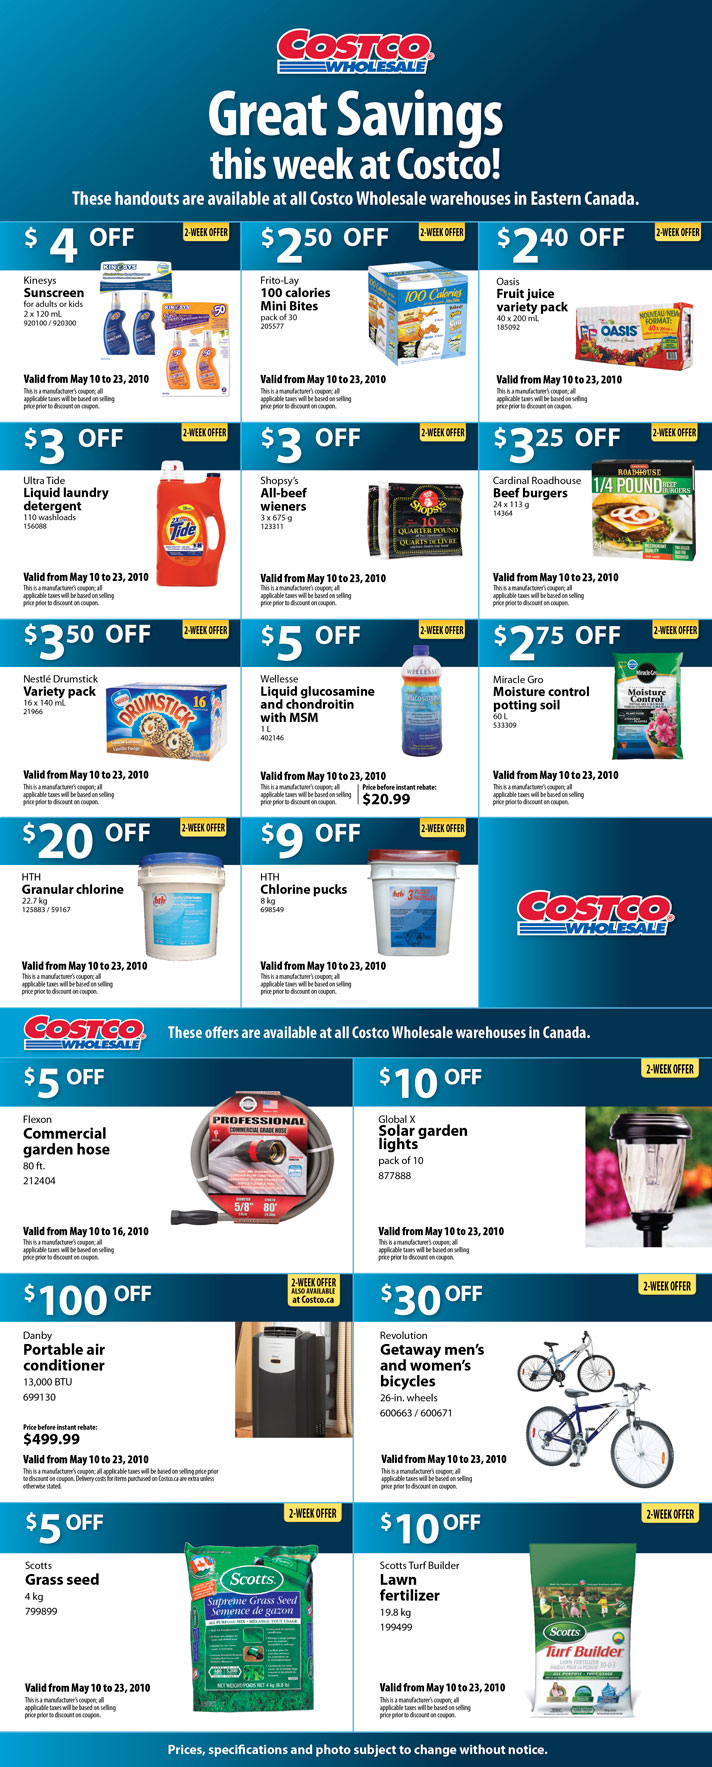 this-week-s-costco-instant-savings-coupons-may-10-23-2010